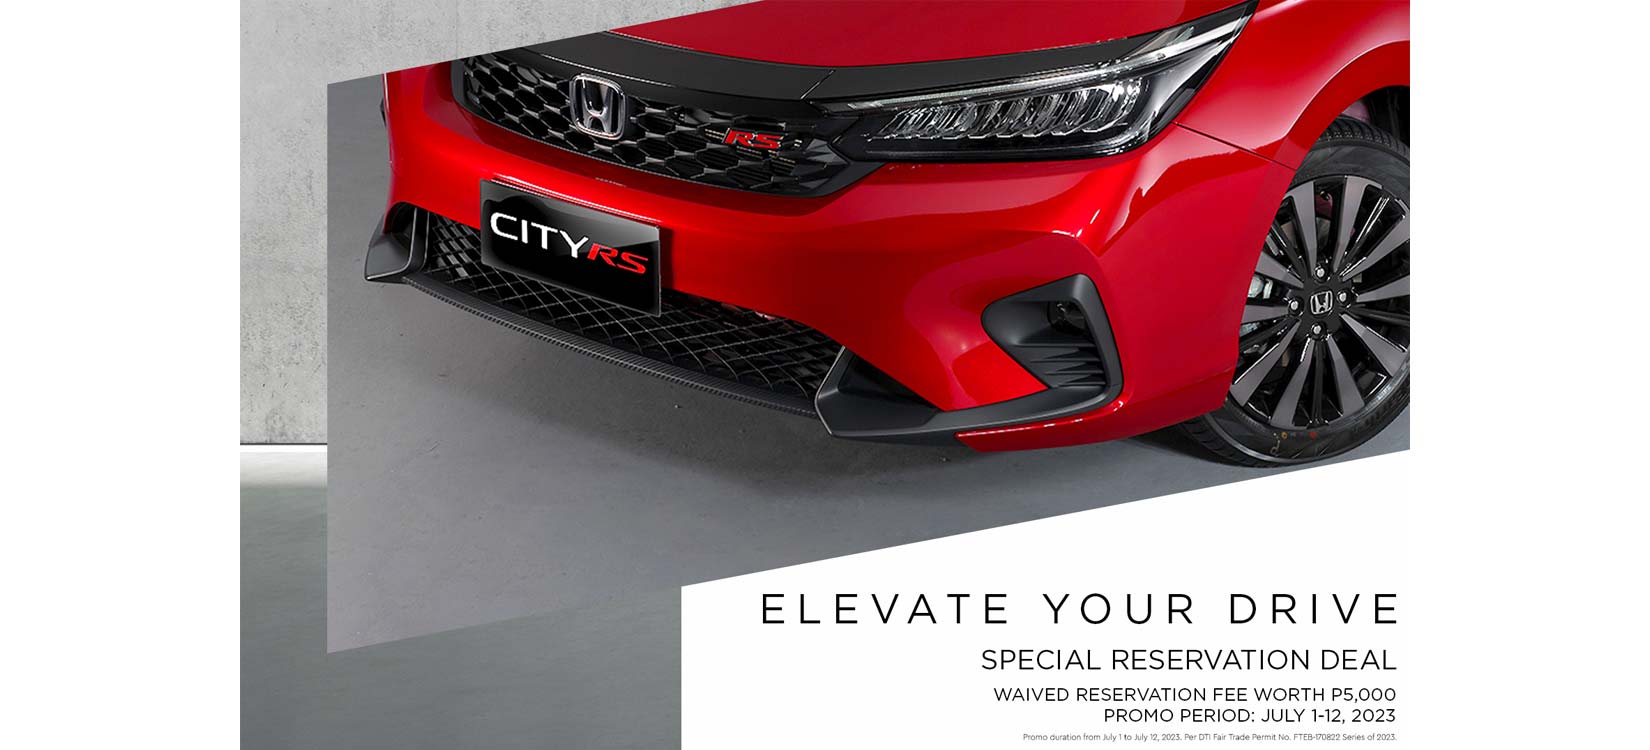 Elevate your drive with the New Honda City now with Honda SENSING; Coming your way July 13th, now accepting reservations